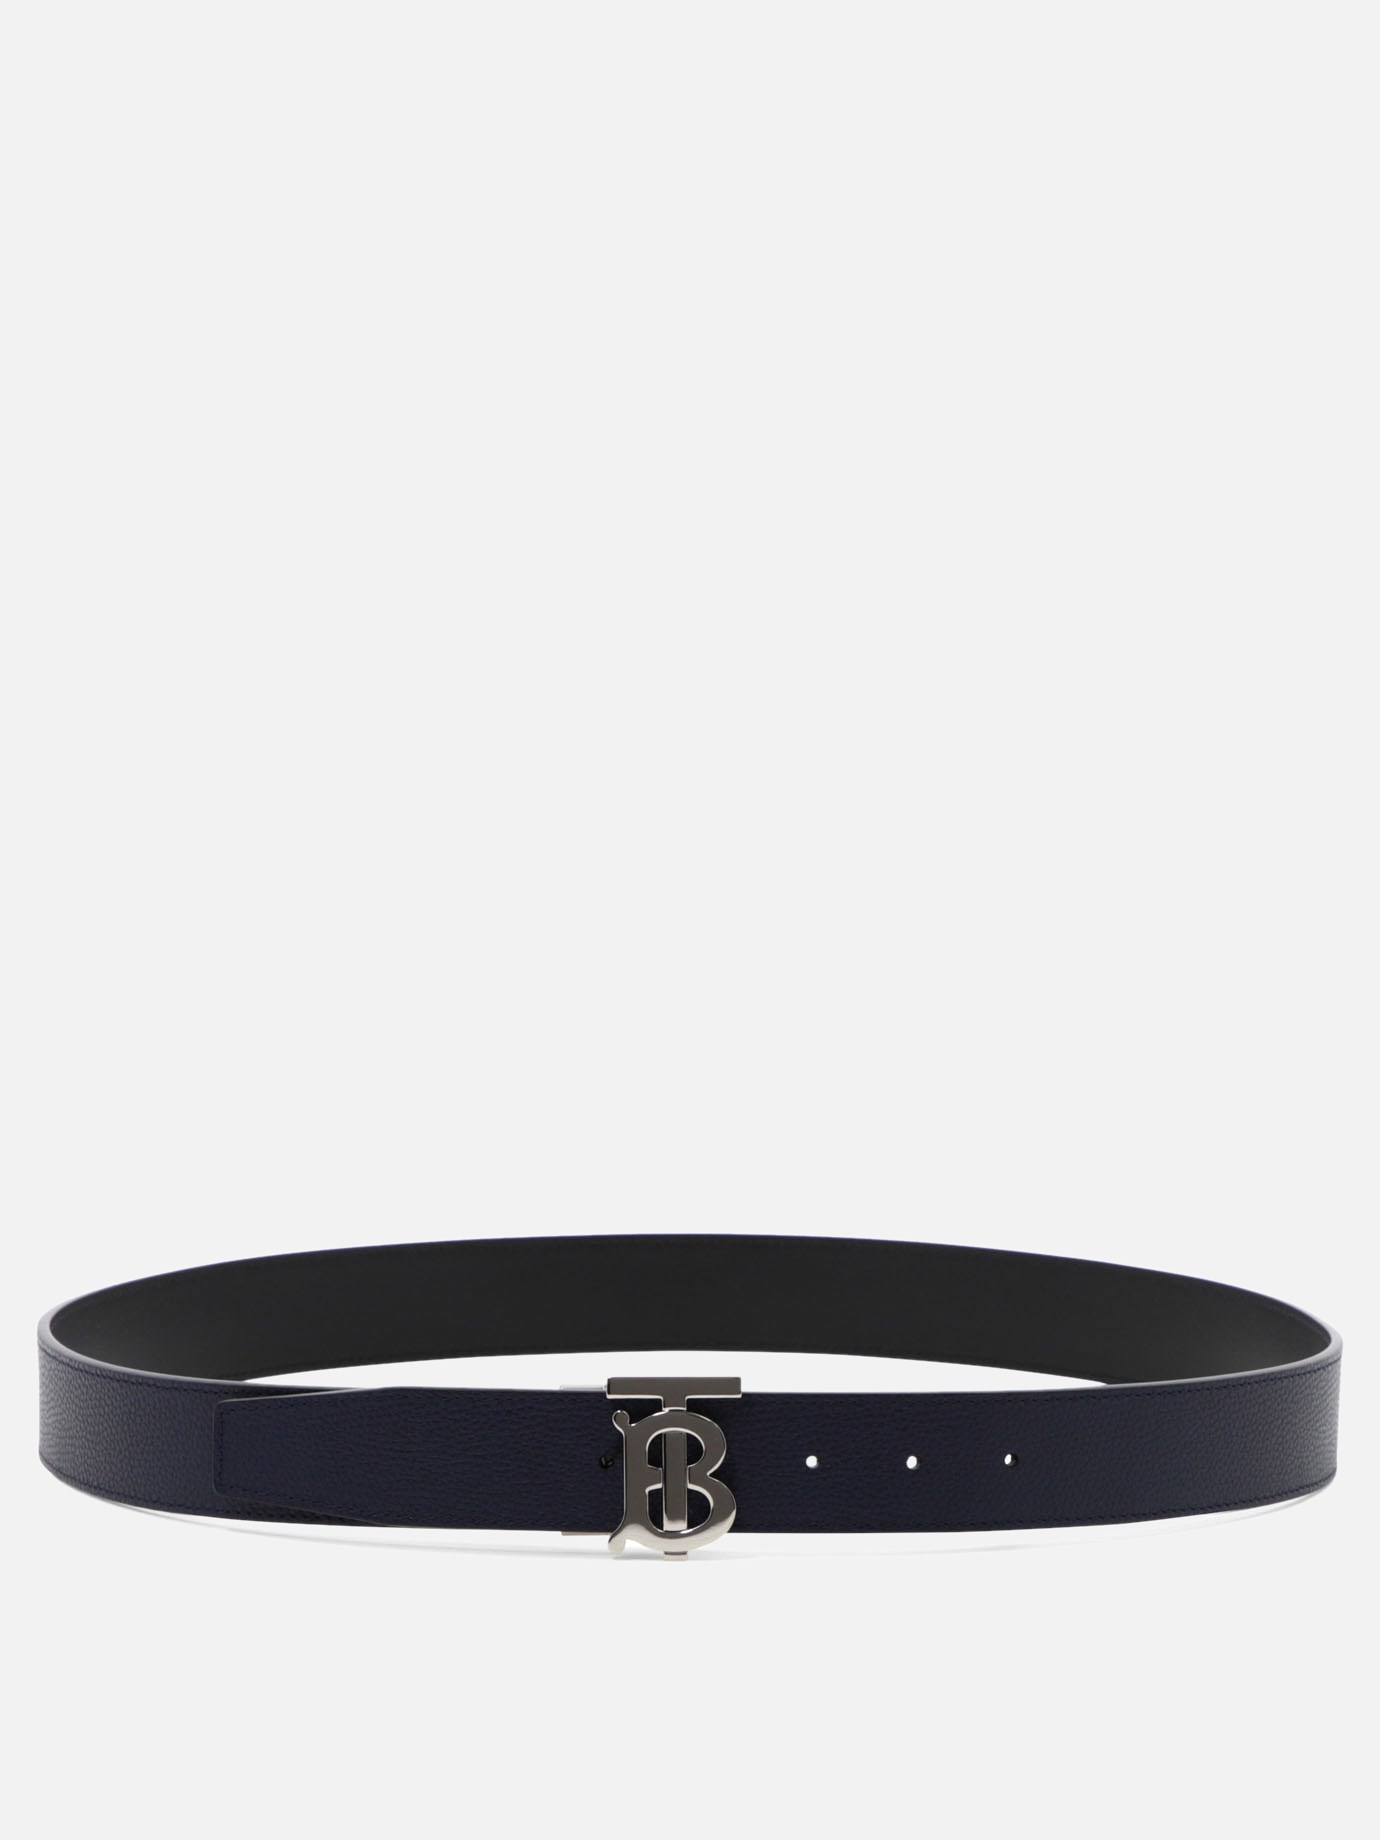  TB  reversible beltby Burberry - 2